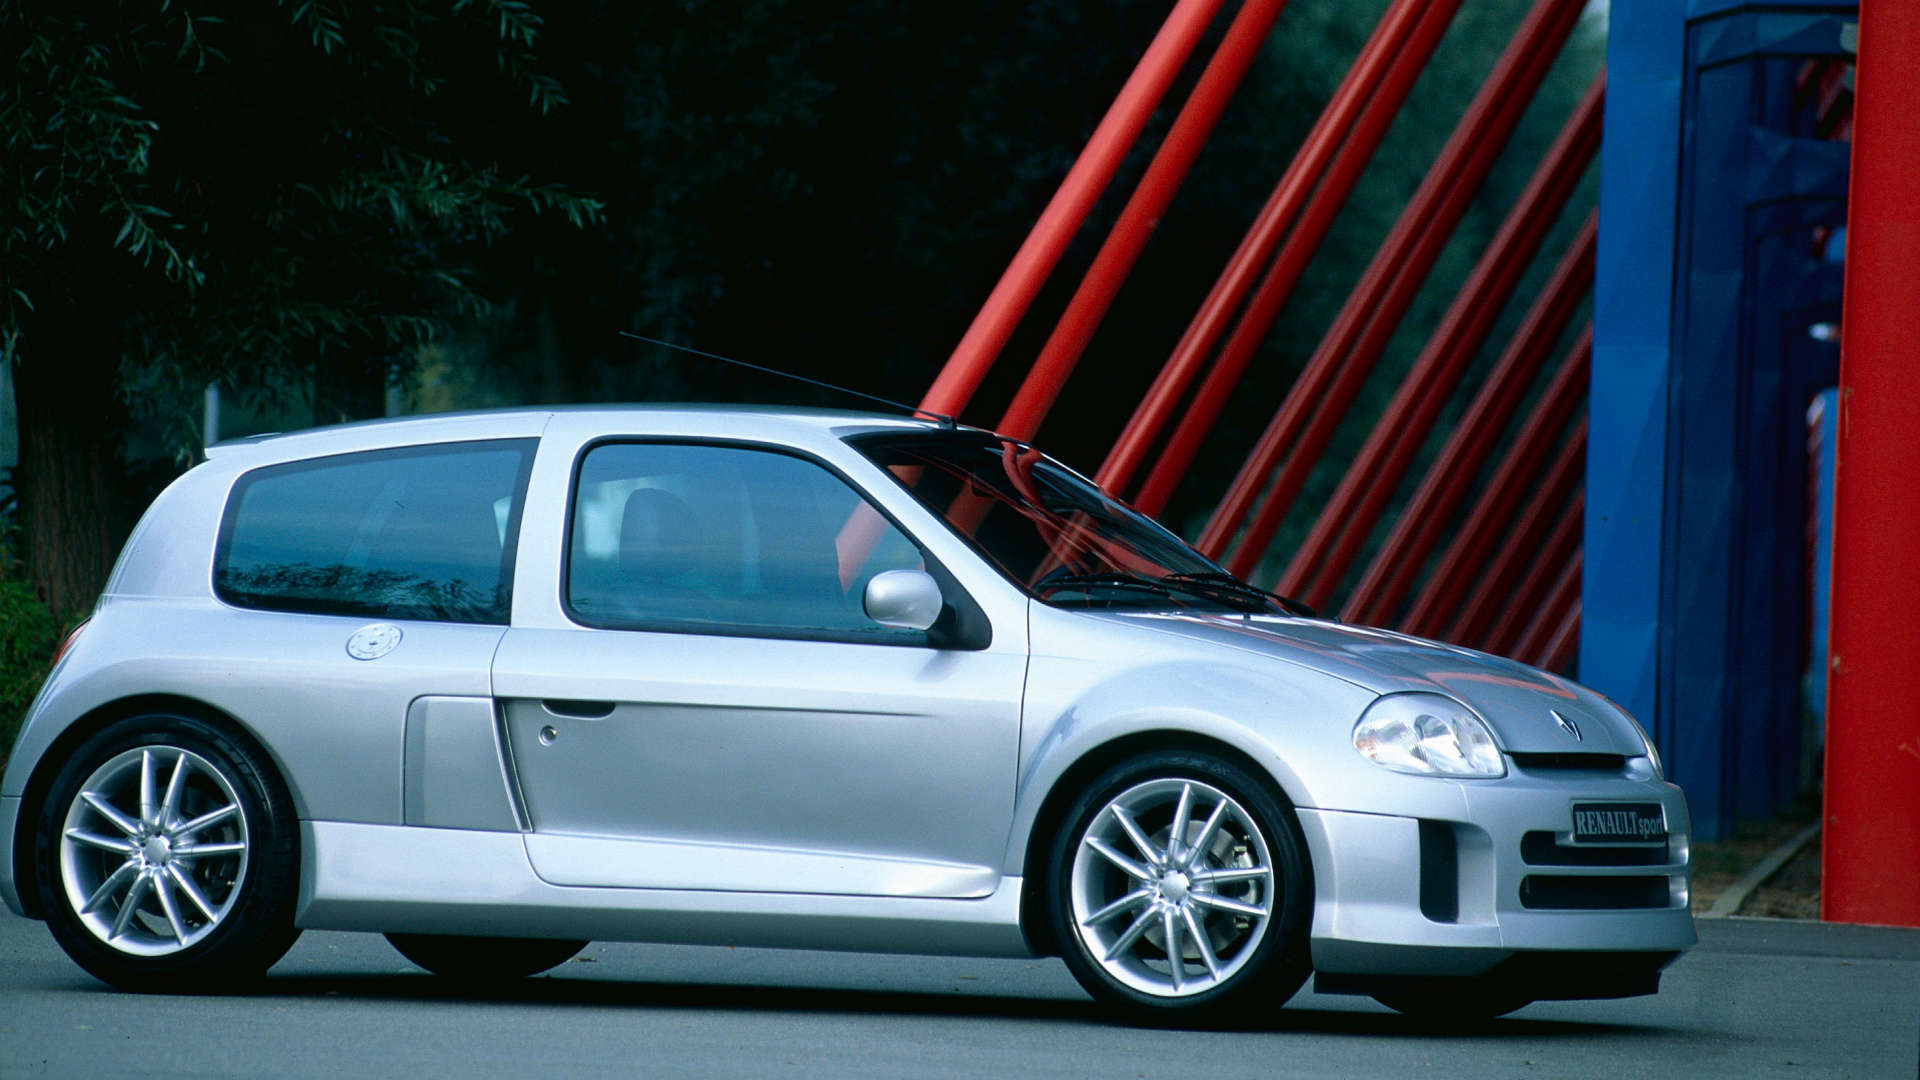 Everything You Heard About the Ridiculous Renault Clio V-6 Is True